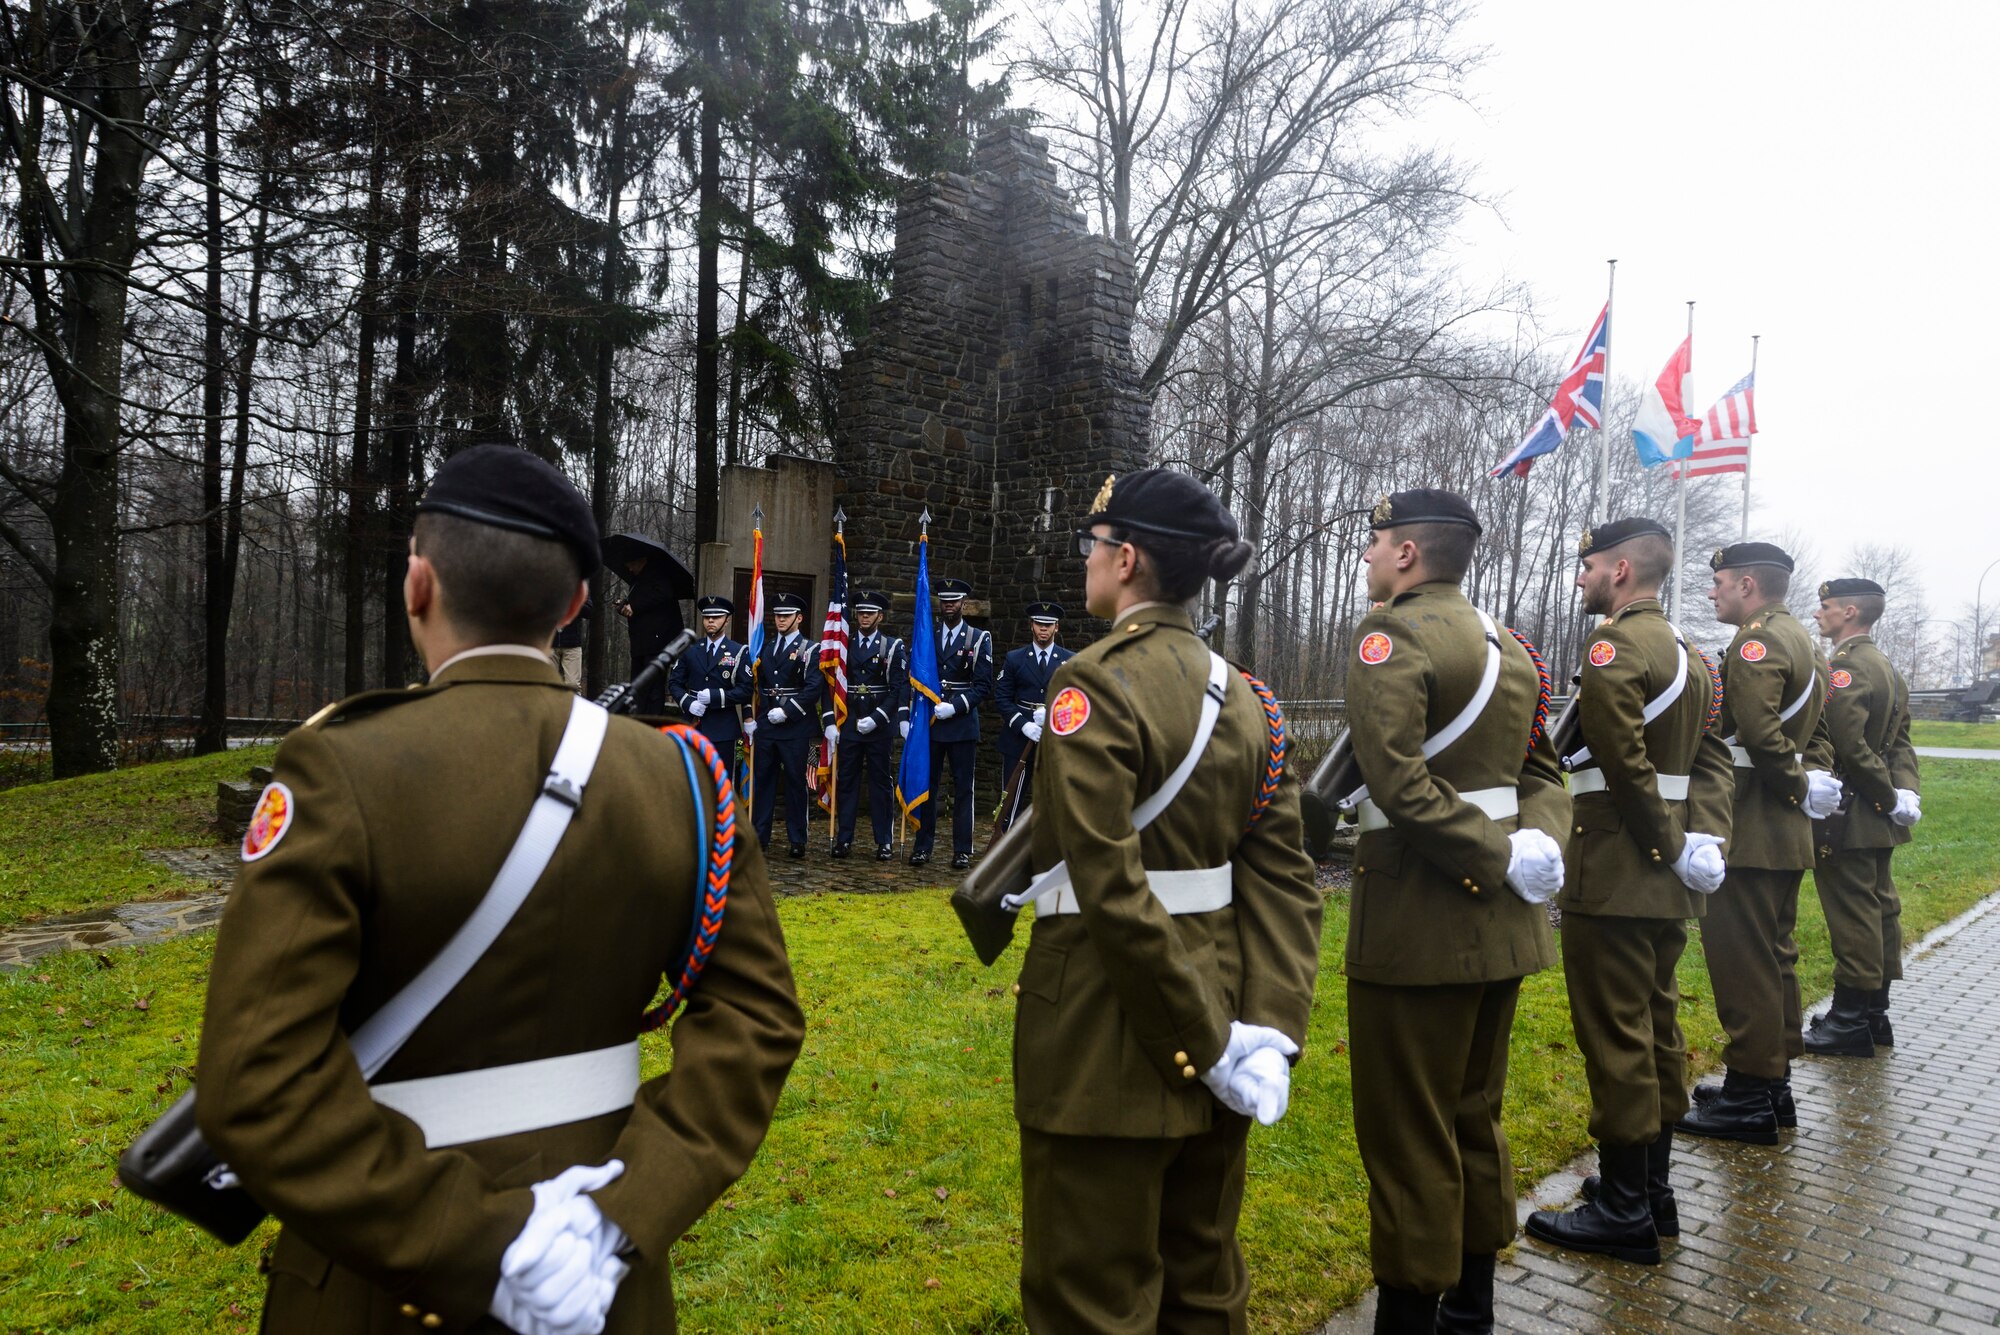 U.S. Air Force Honor Guardsmen assigned to the 52nd Fighter Wing and Luxembourg Army Honor Guard members participate in a Battle of the Bulge anniversary ceremony at the National Liberation Memorial in Schumanns Eck, Luxembourg, Dec. 16, 2015. The battle took place in parts of Belgium, France, Luxembourg and Germany beginning in the winter of 1944. (U.S. Air Force photo by Staff Sgt. Christopher Ruano/Released)